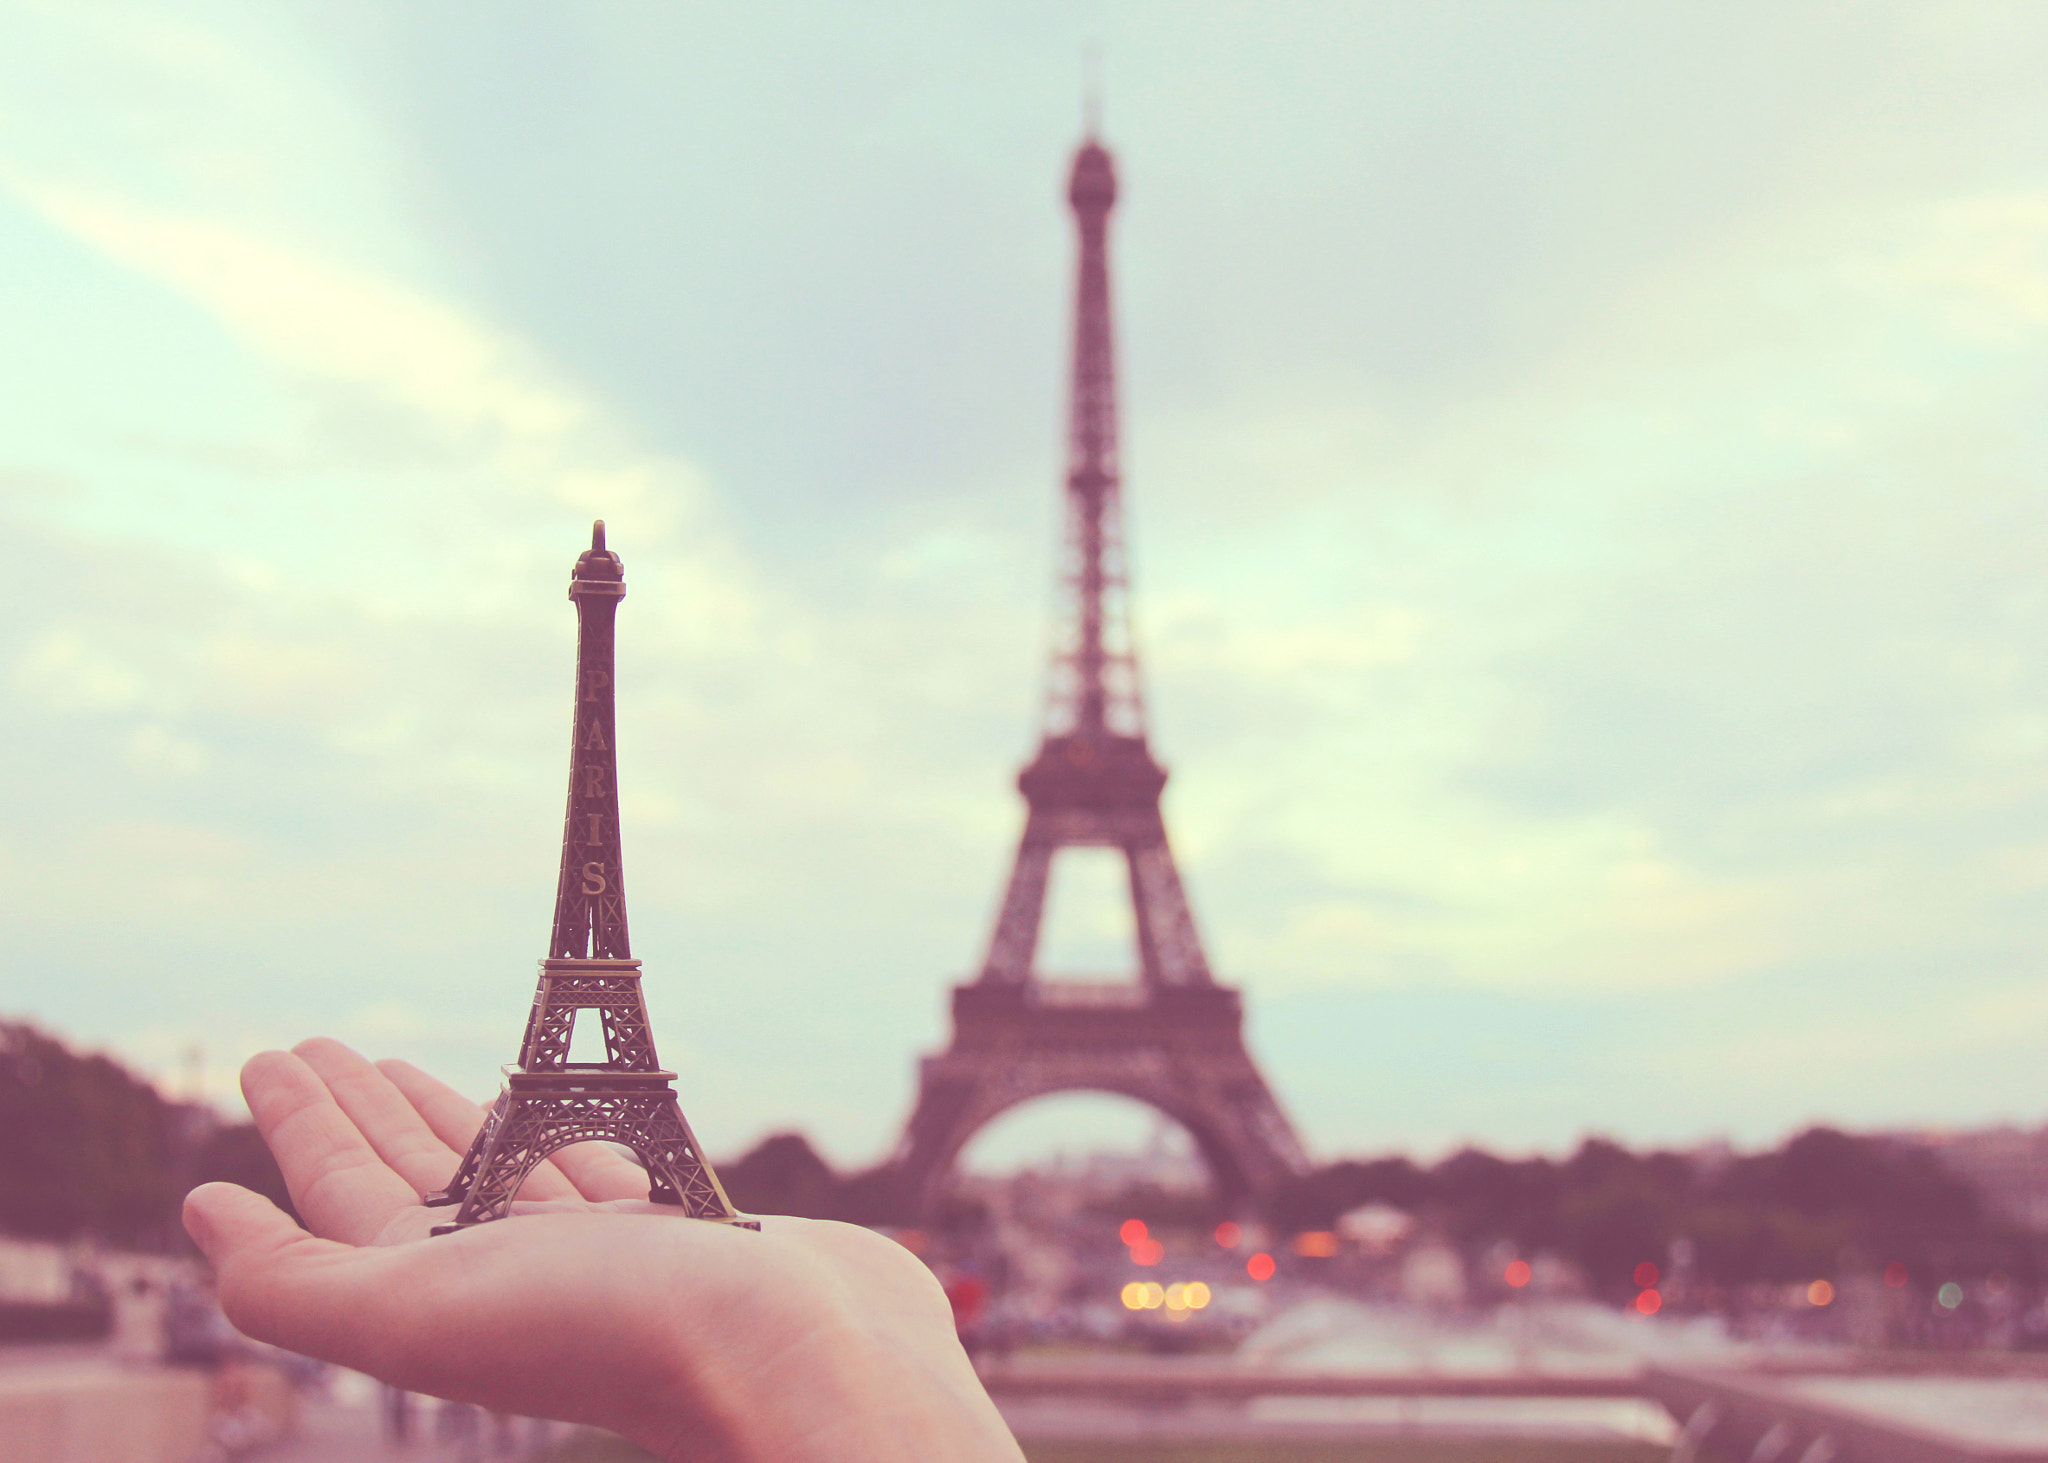 18.0 - 200.0 mm sample photo. Hand holding eiffel tower model in paris photography